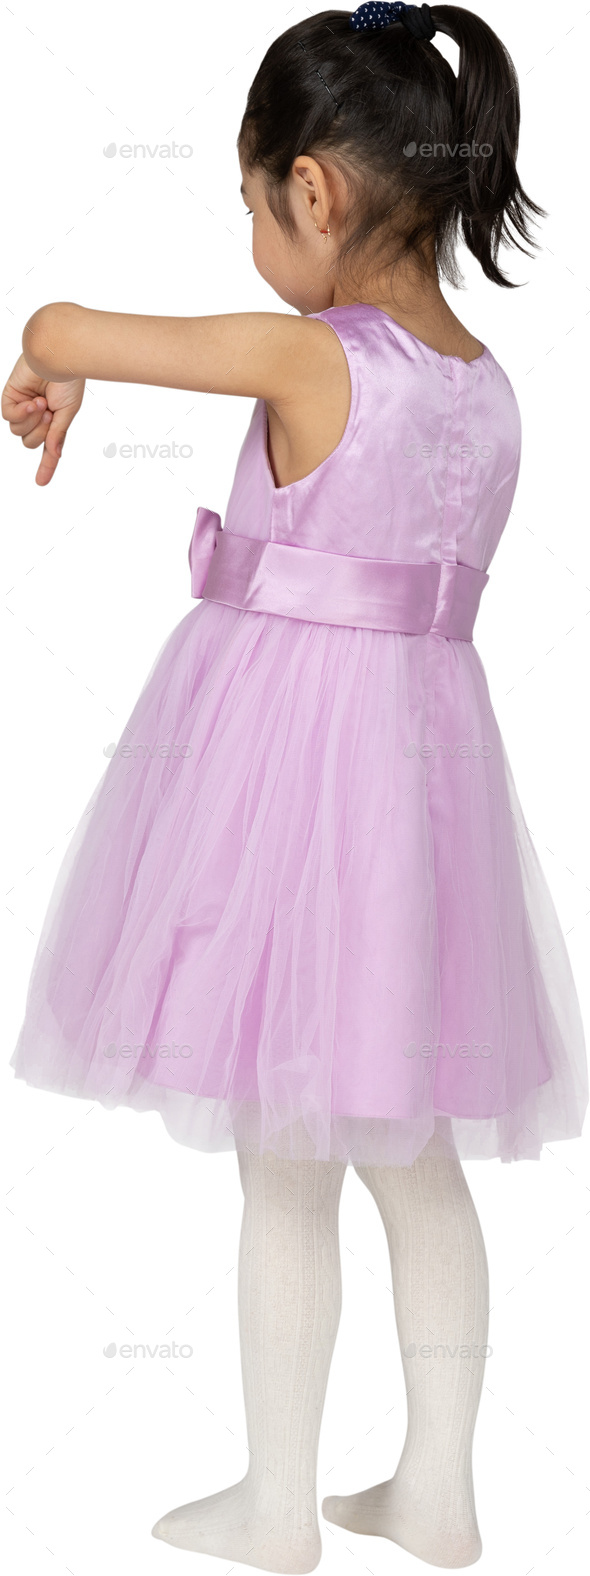 a little girl in a pink dress and white tights Stock Photo by Icons8